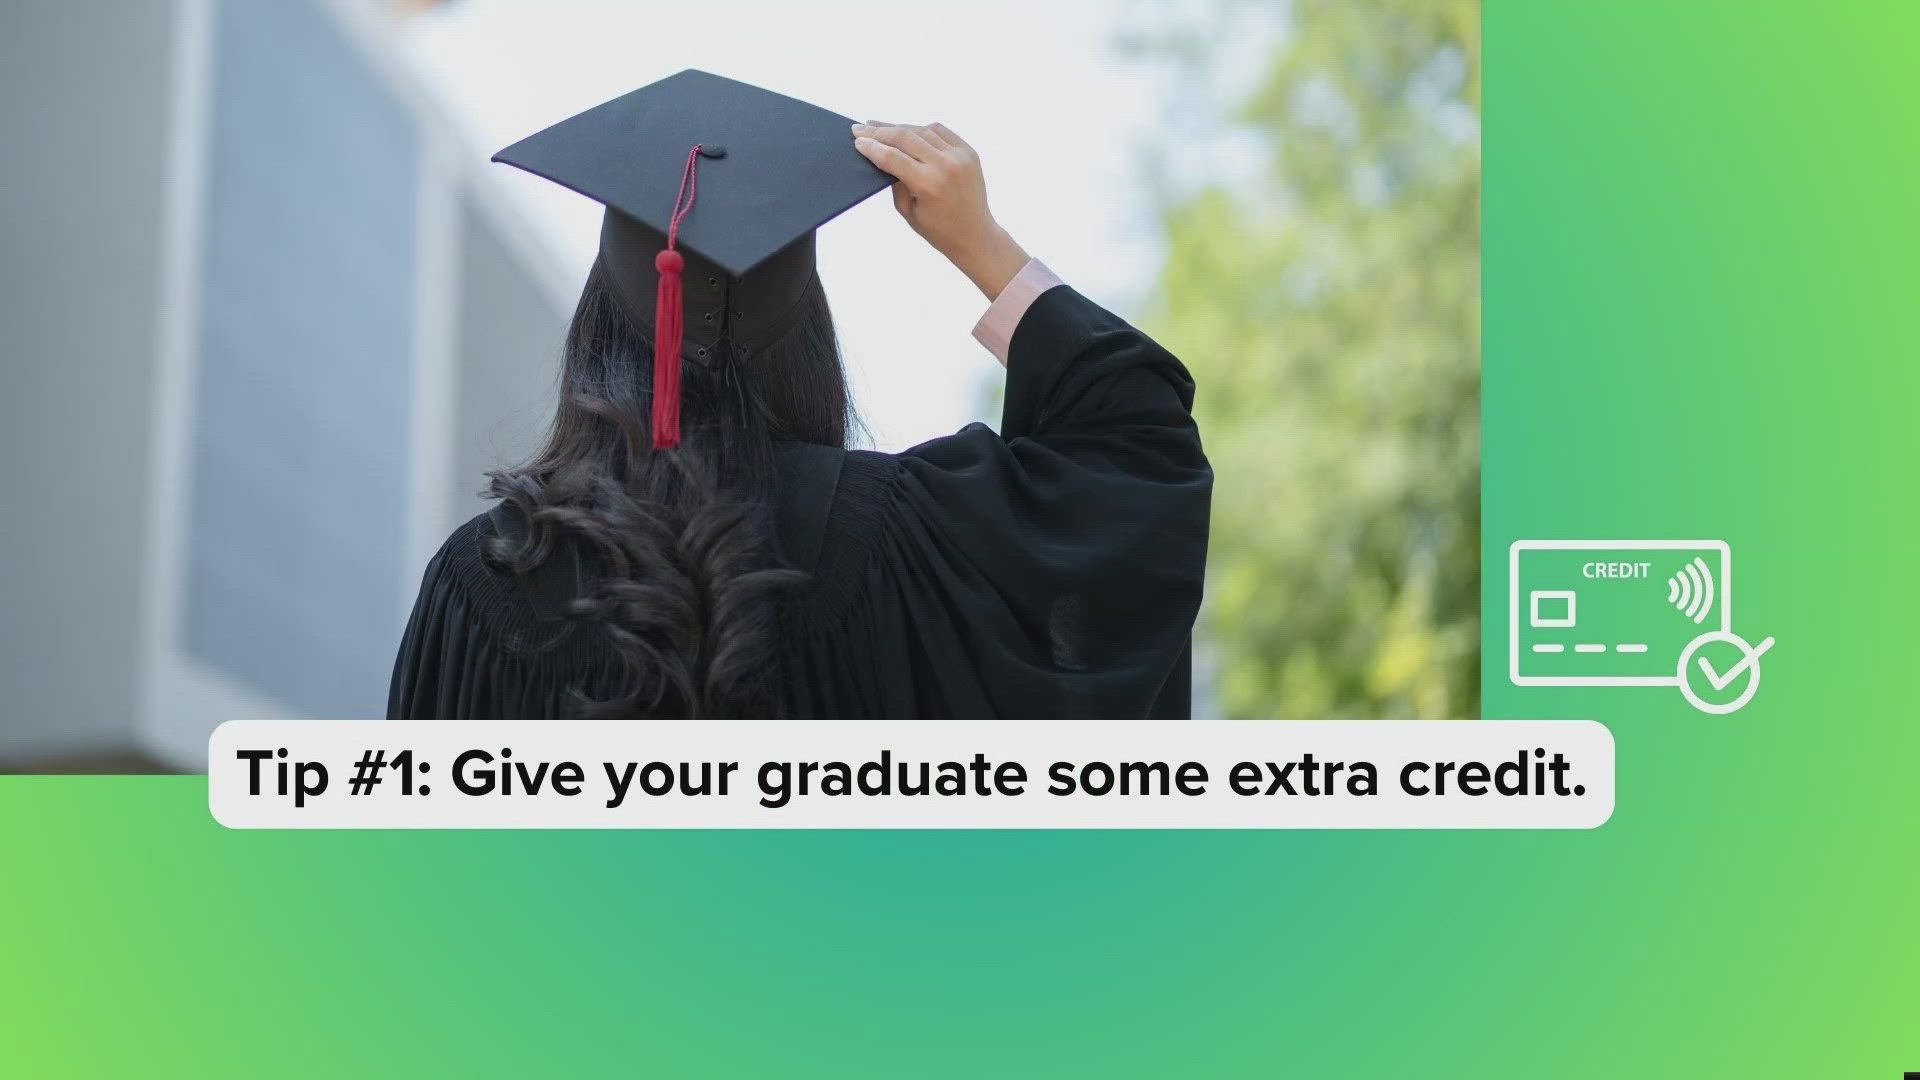 Here with some tips to give your grad the tools they need to succeed is money and business expert, Derrick Kinney.